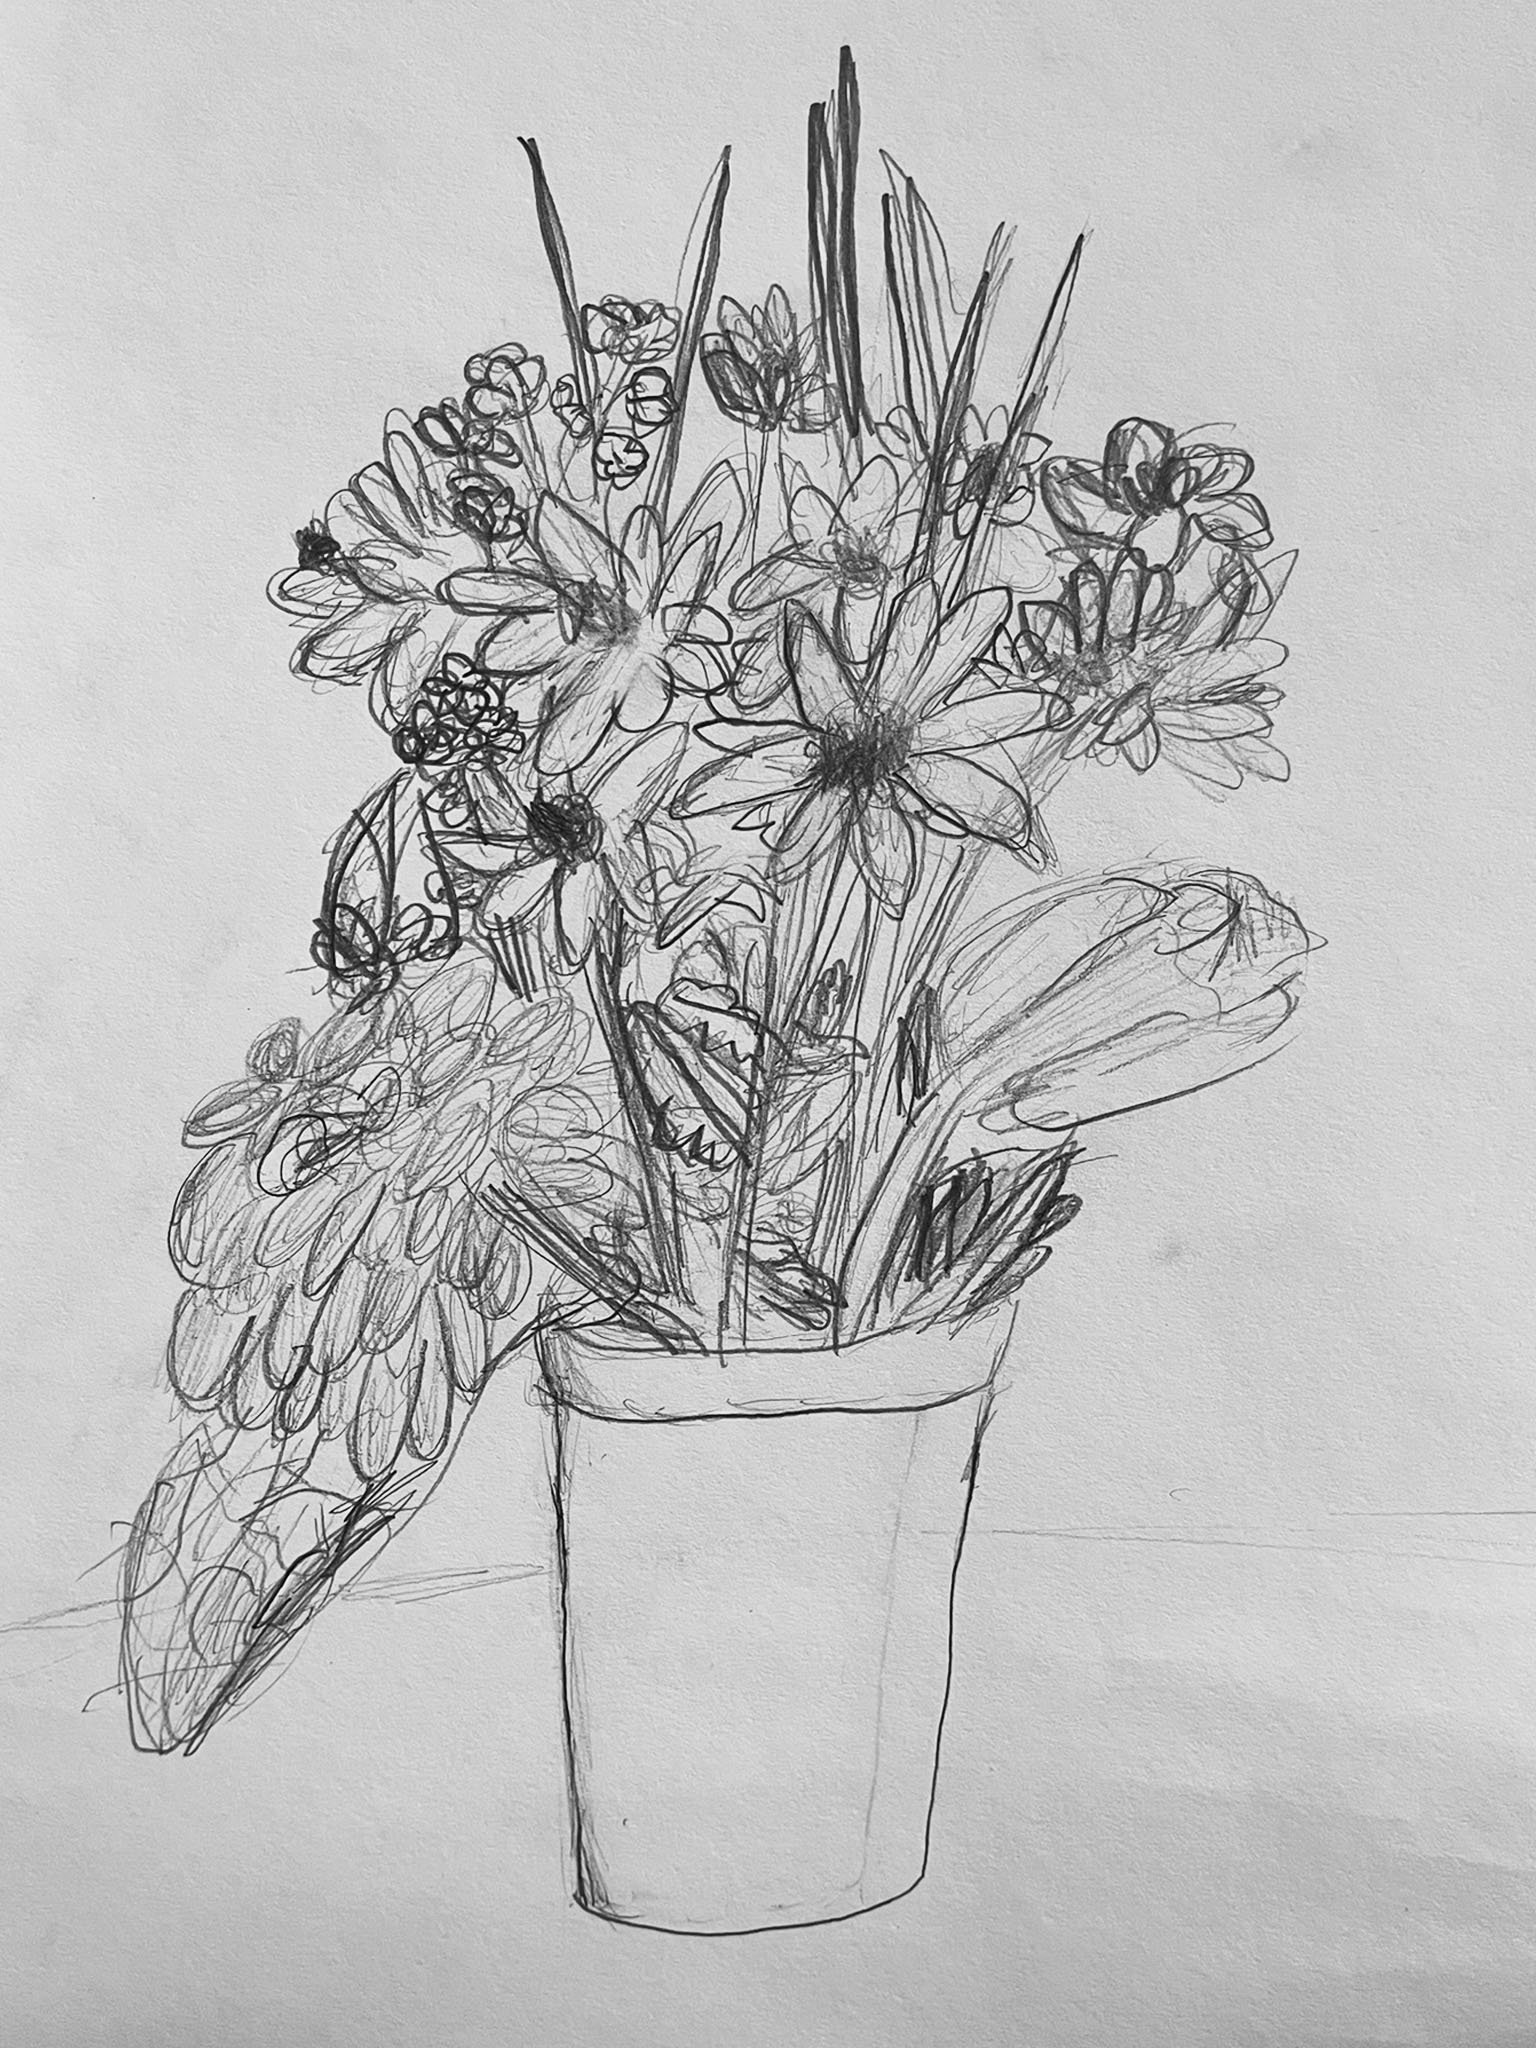 Flower Study in Pencil